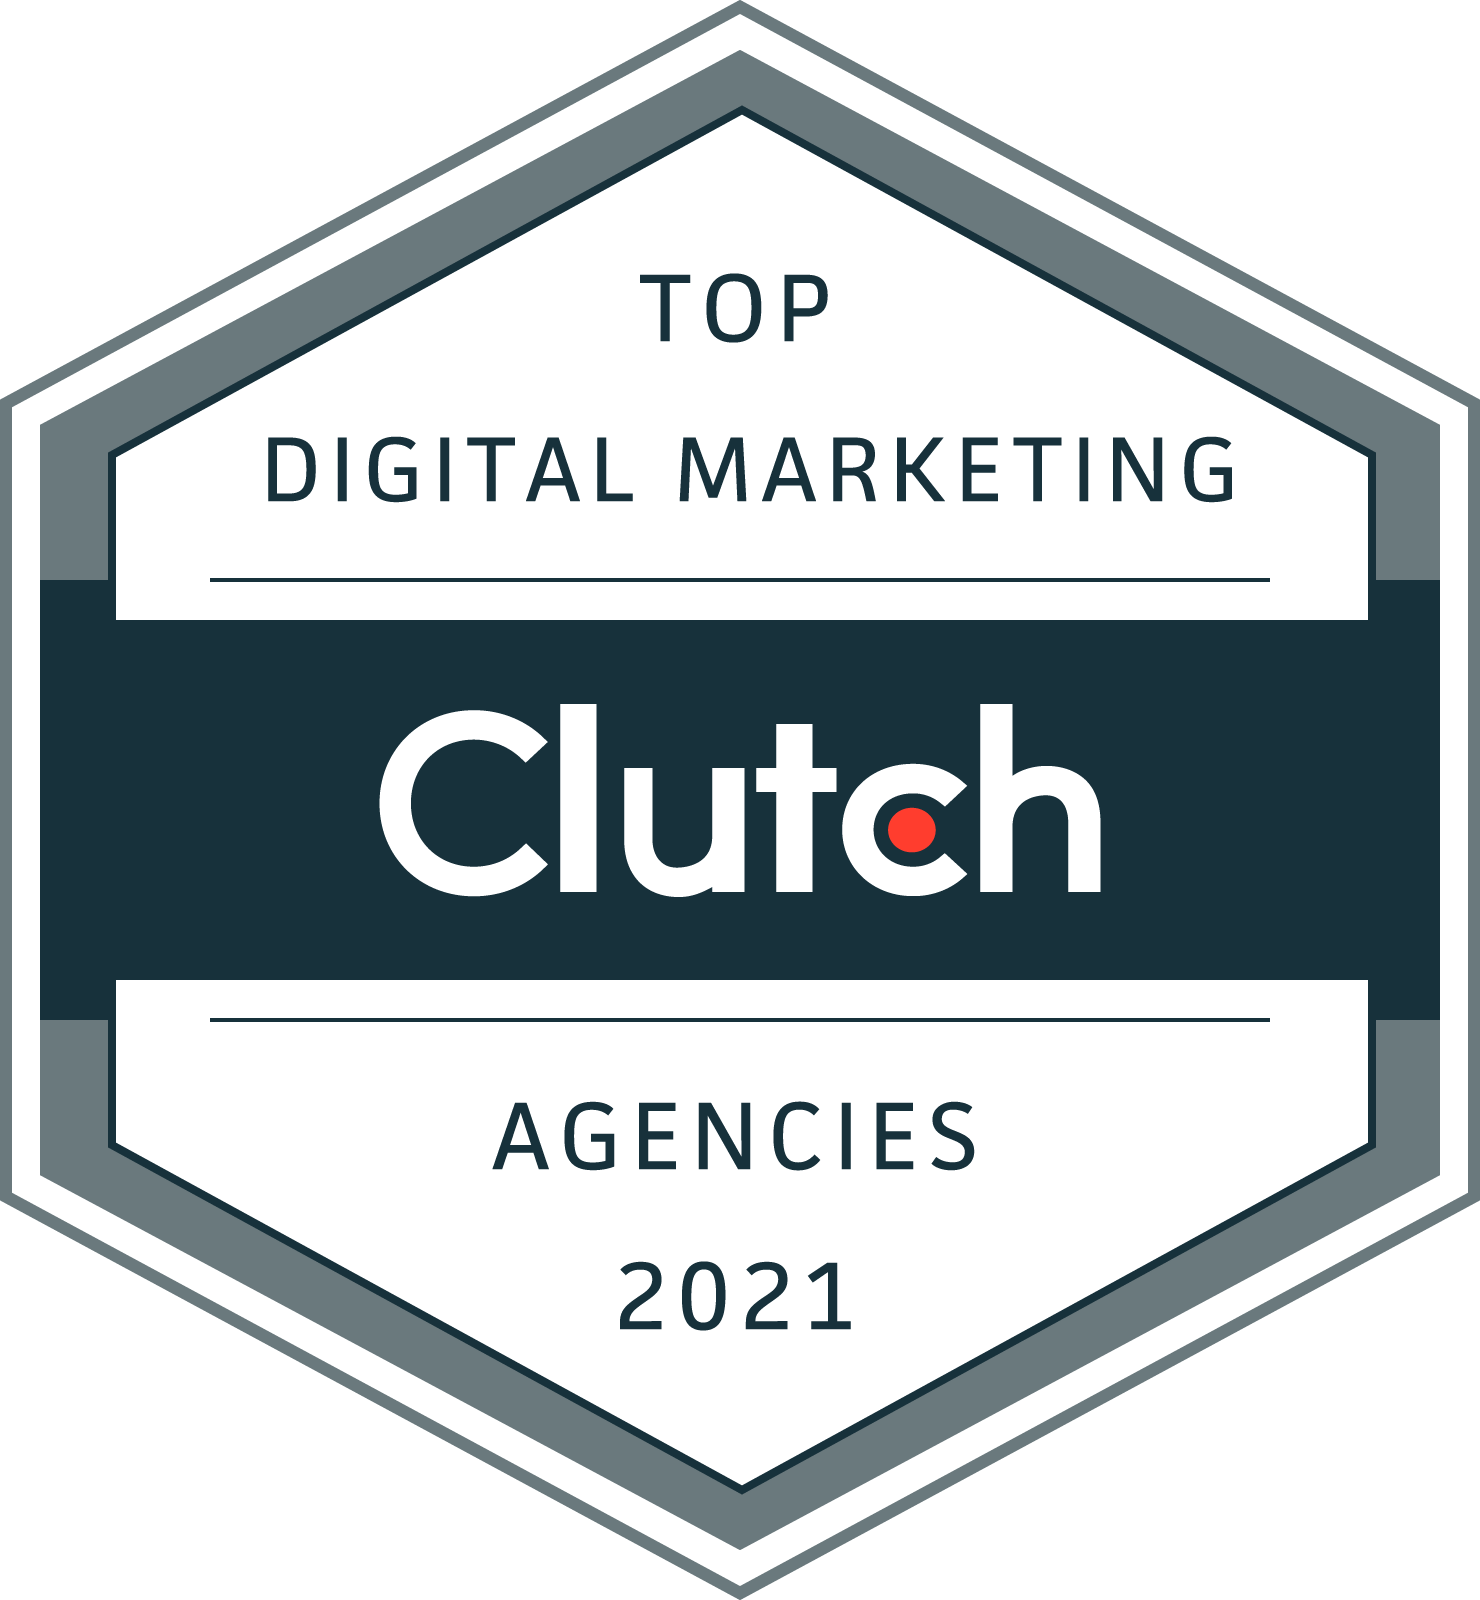 Best Digital Marketing Agencies And Services 2021 by Clutch